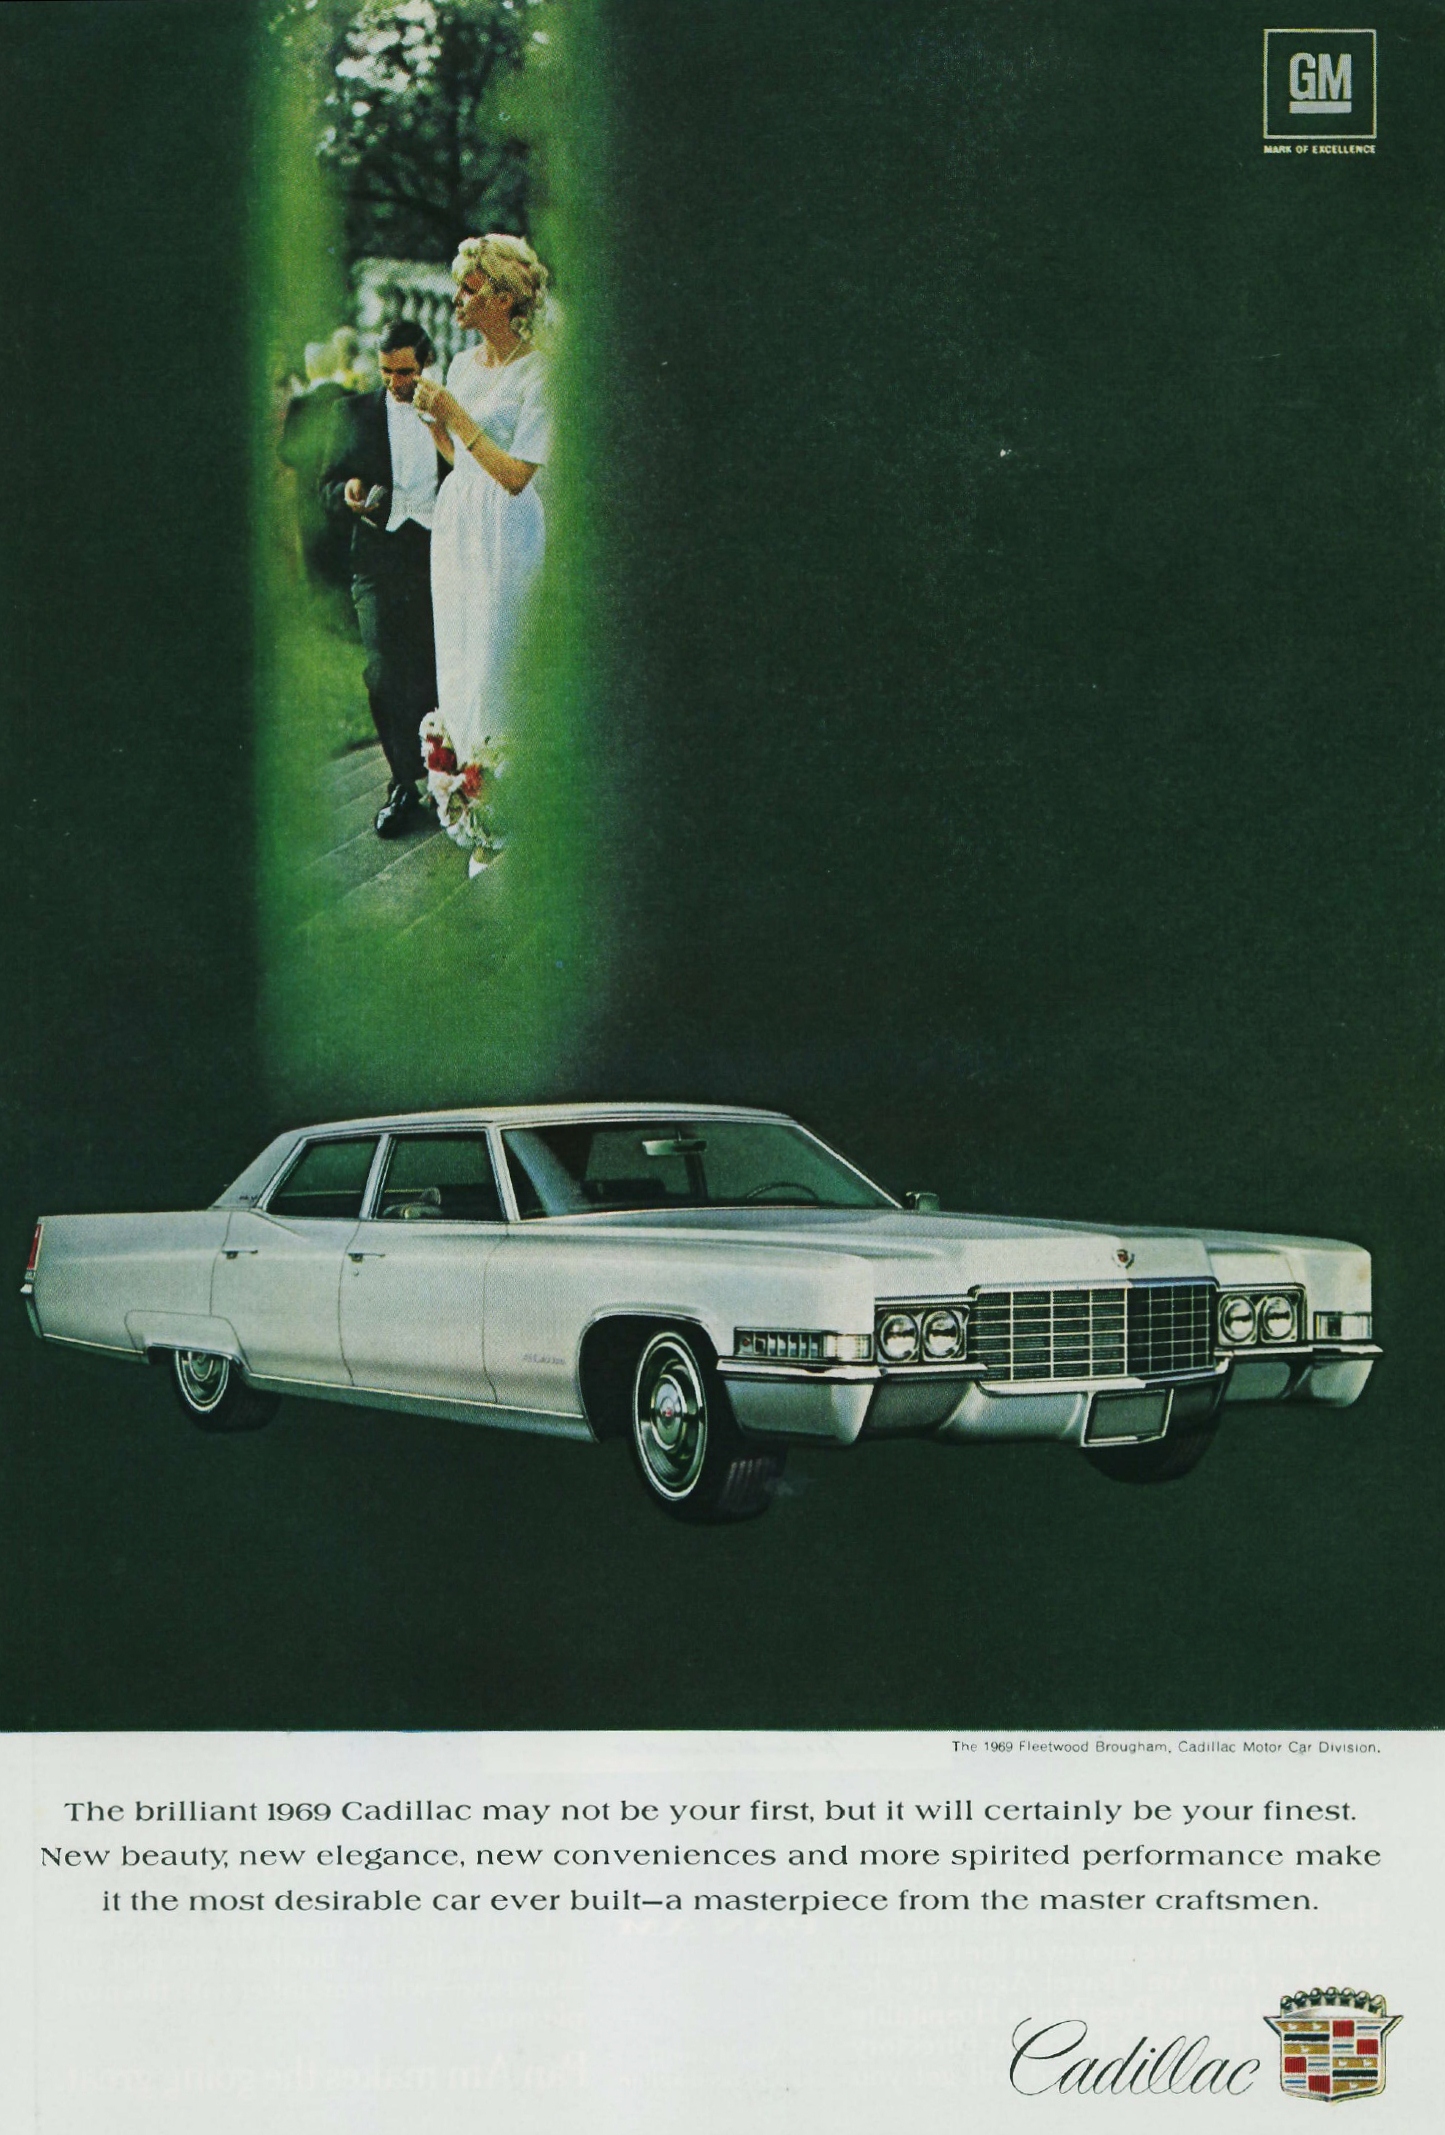 the advertising shows an old car with people and a man standing next to it